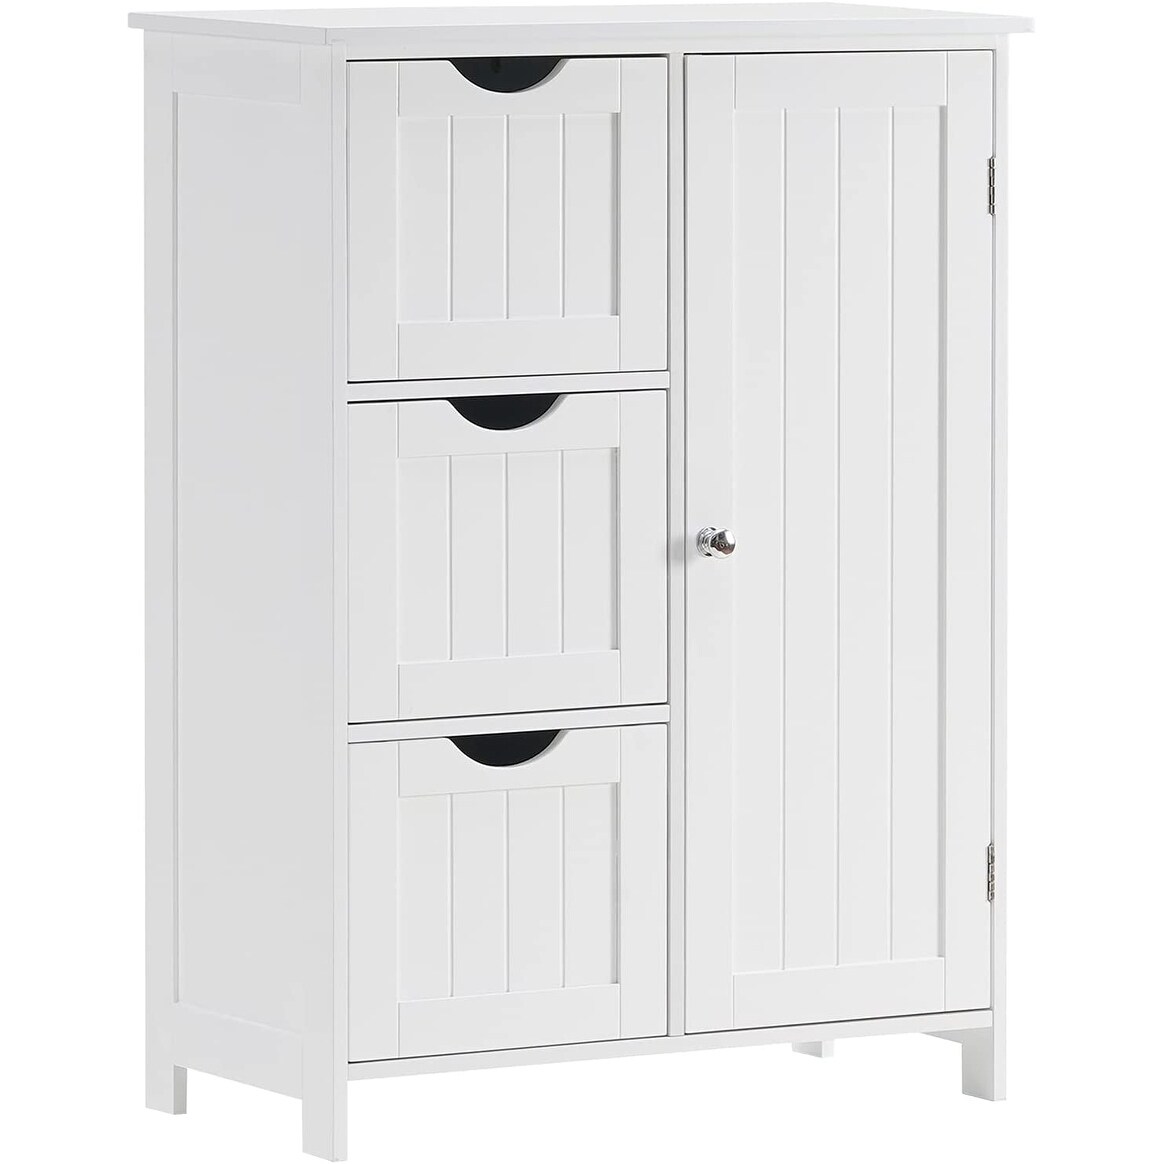 https://ak1.ostkcdn.com/images/products/is/images/direct/7eb6f1092698ca86e81d9735a984397a24780d30/Bathroom-Floor-Cabinet%2C-Wooden-Freestanding-Storage-Cabinet%2C-Side-Storage-Organizer-with-1-Cupboard-and-3-Drawers.jpg